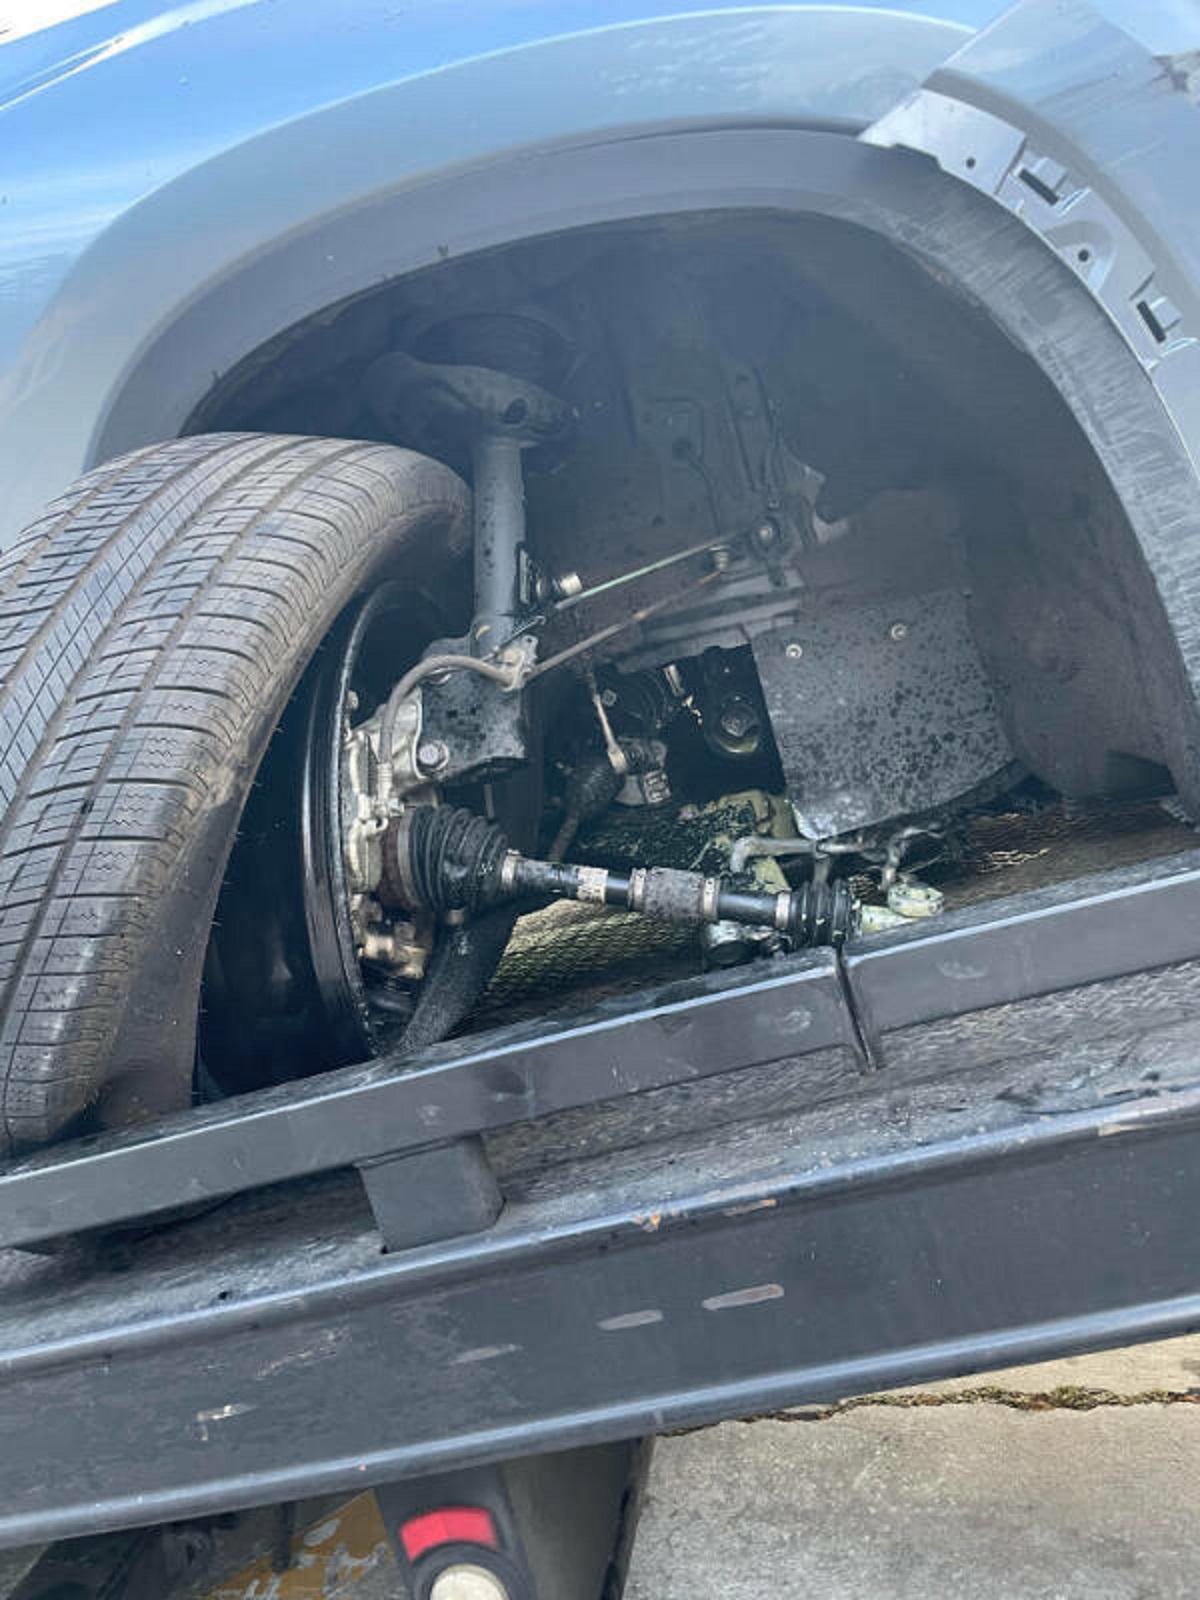 “My family’s axle exploded on the highway on our way to Disneyworld.”